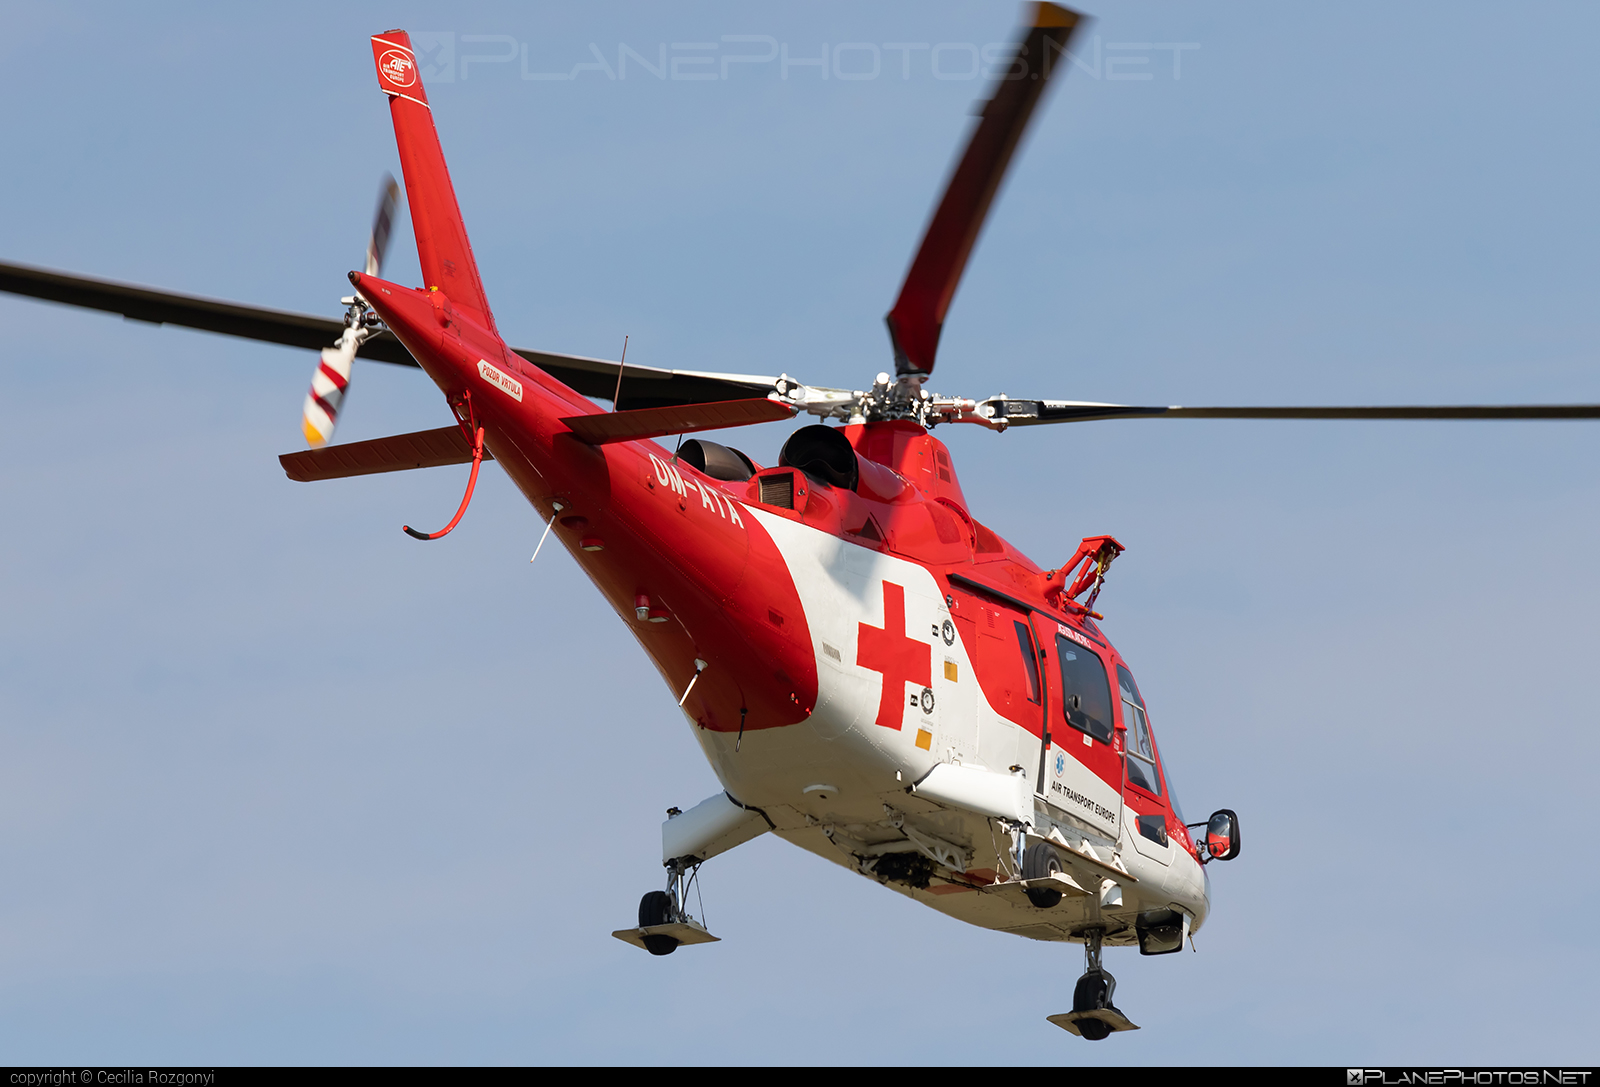 Agusta A109K2 - OM-ATA operated by Air Transport Europe #a109 #a109k2 #agusta #agusta109 #agustaa109 #agustaa109k2 #airtransporteurope